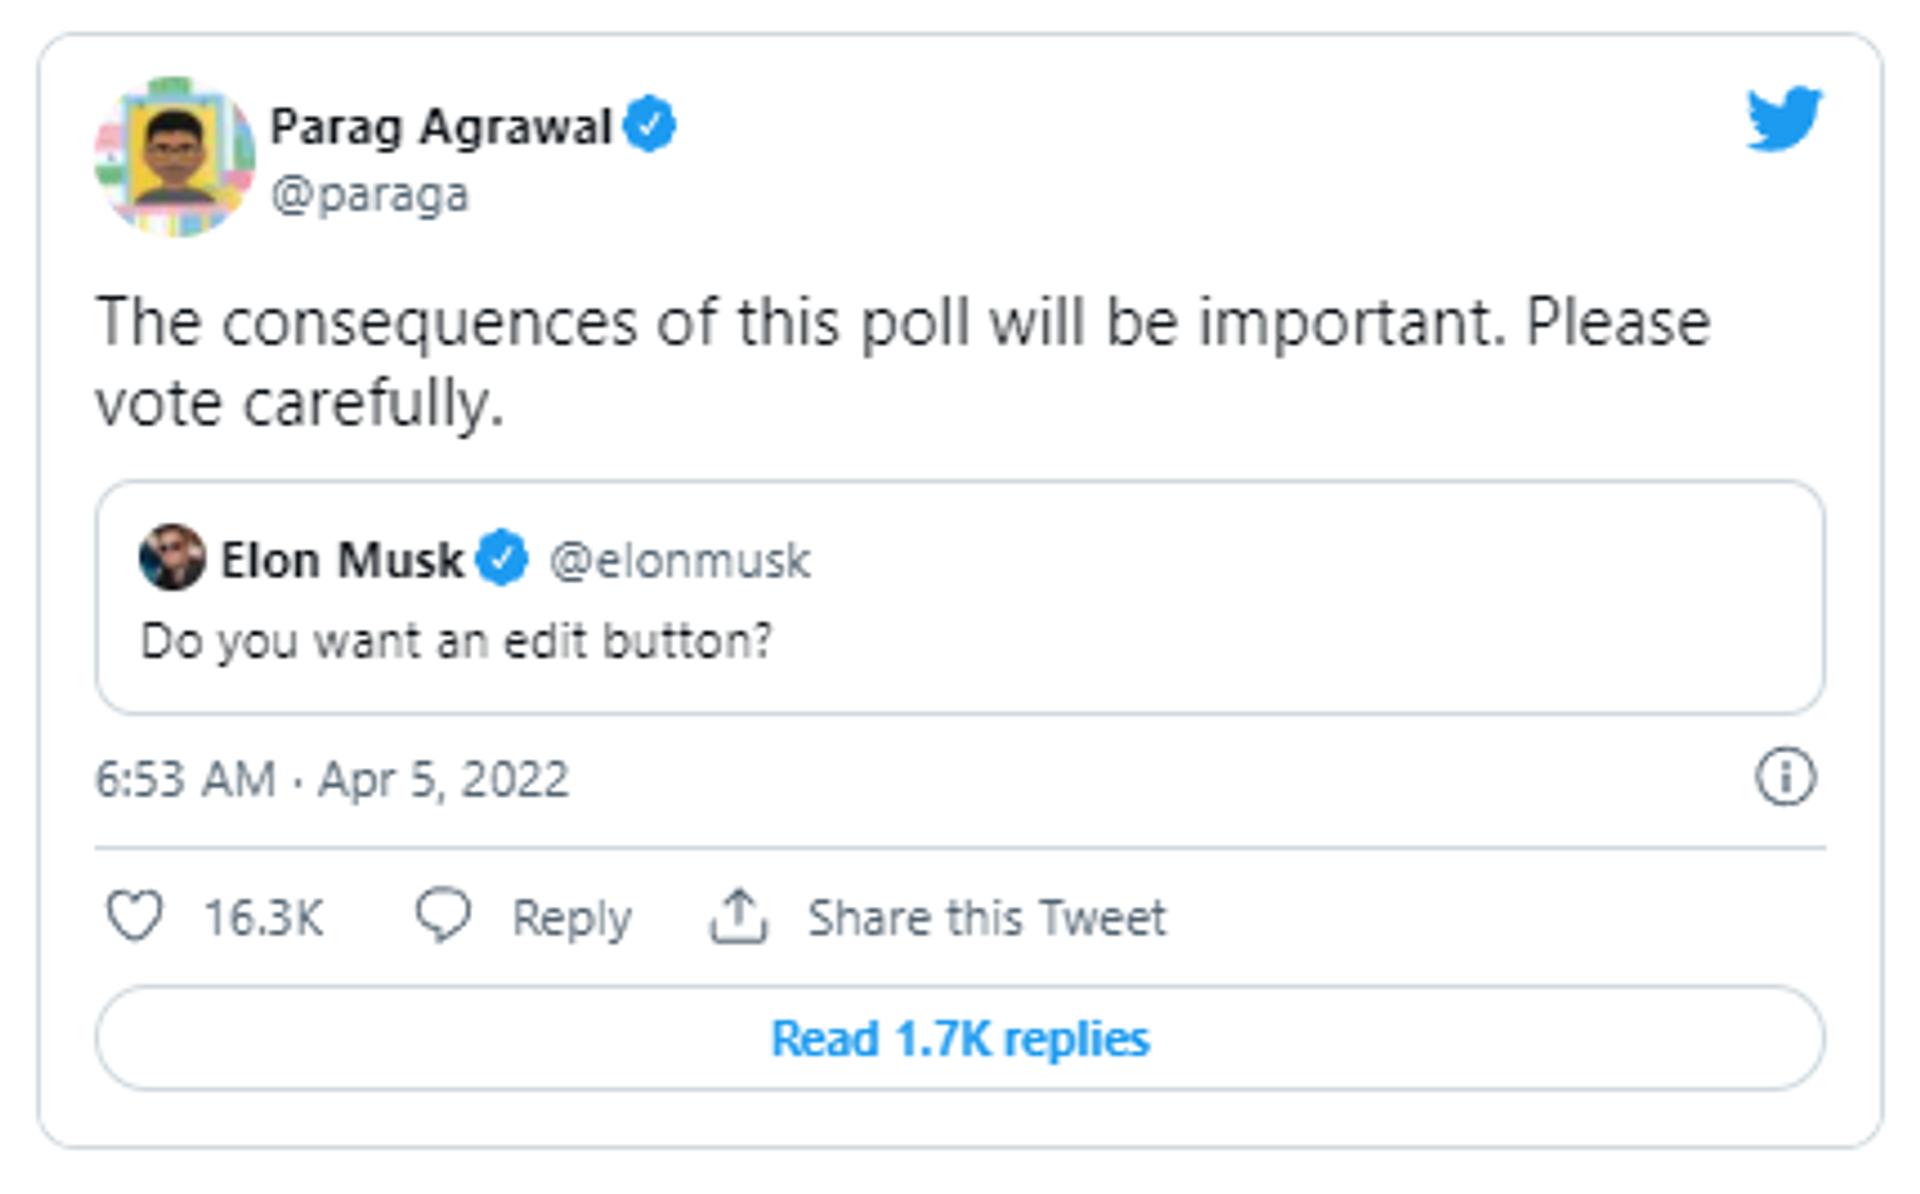 Twitter CEO Parag Agrawal reacts to Elon Musk holding poll on having 'Edit Button' on site - Sputnik International, 1920, 05.04.2022